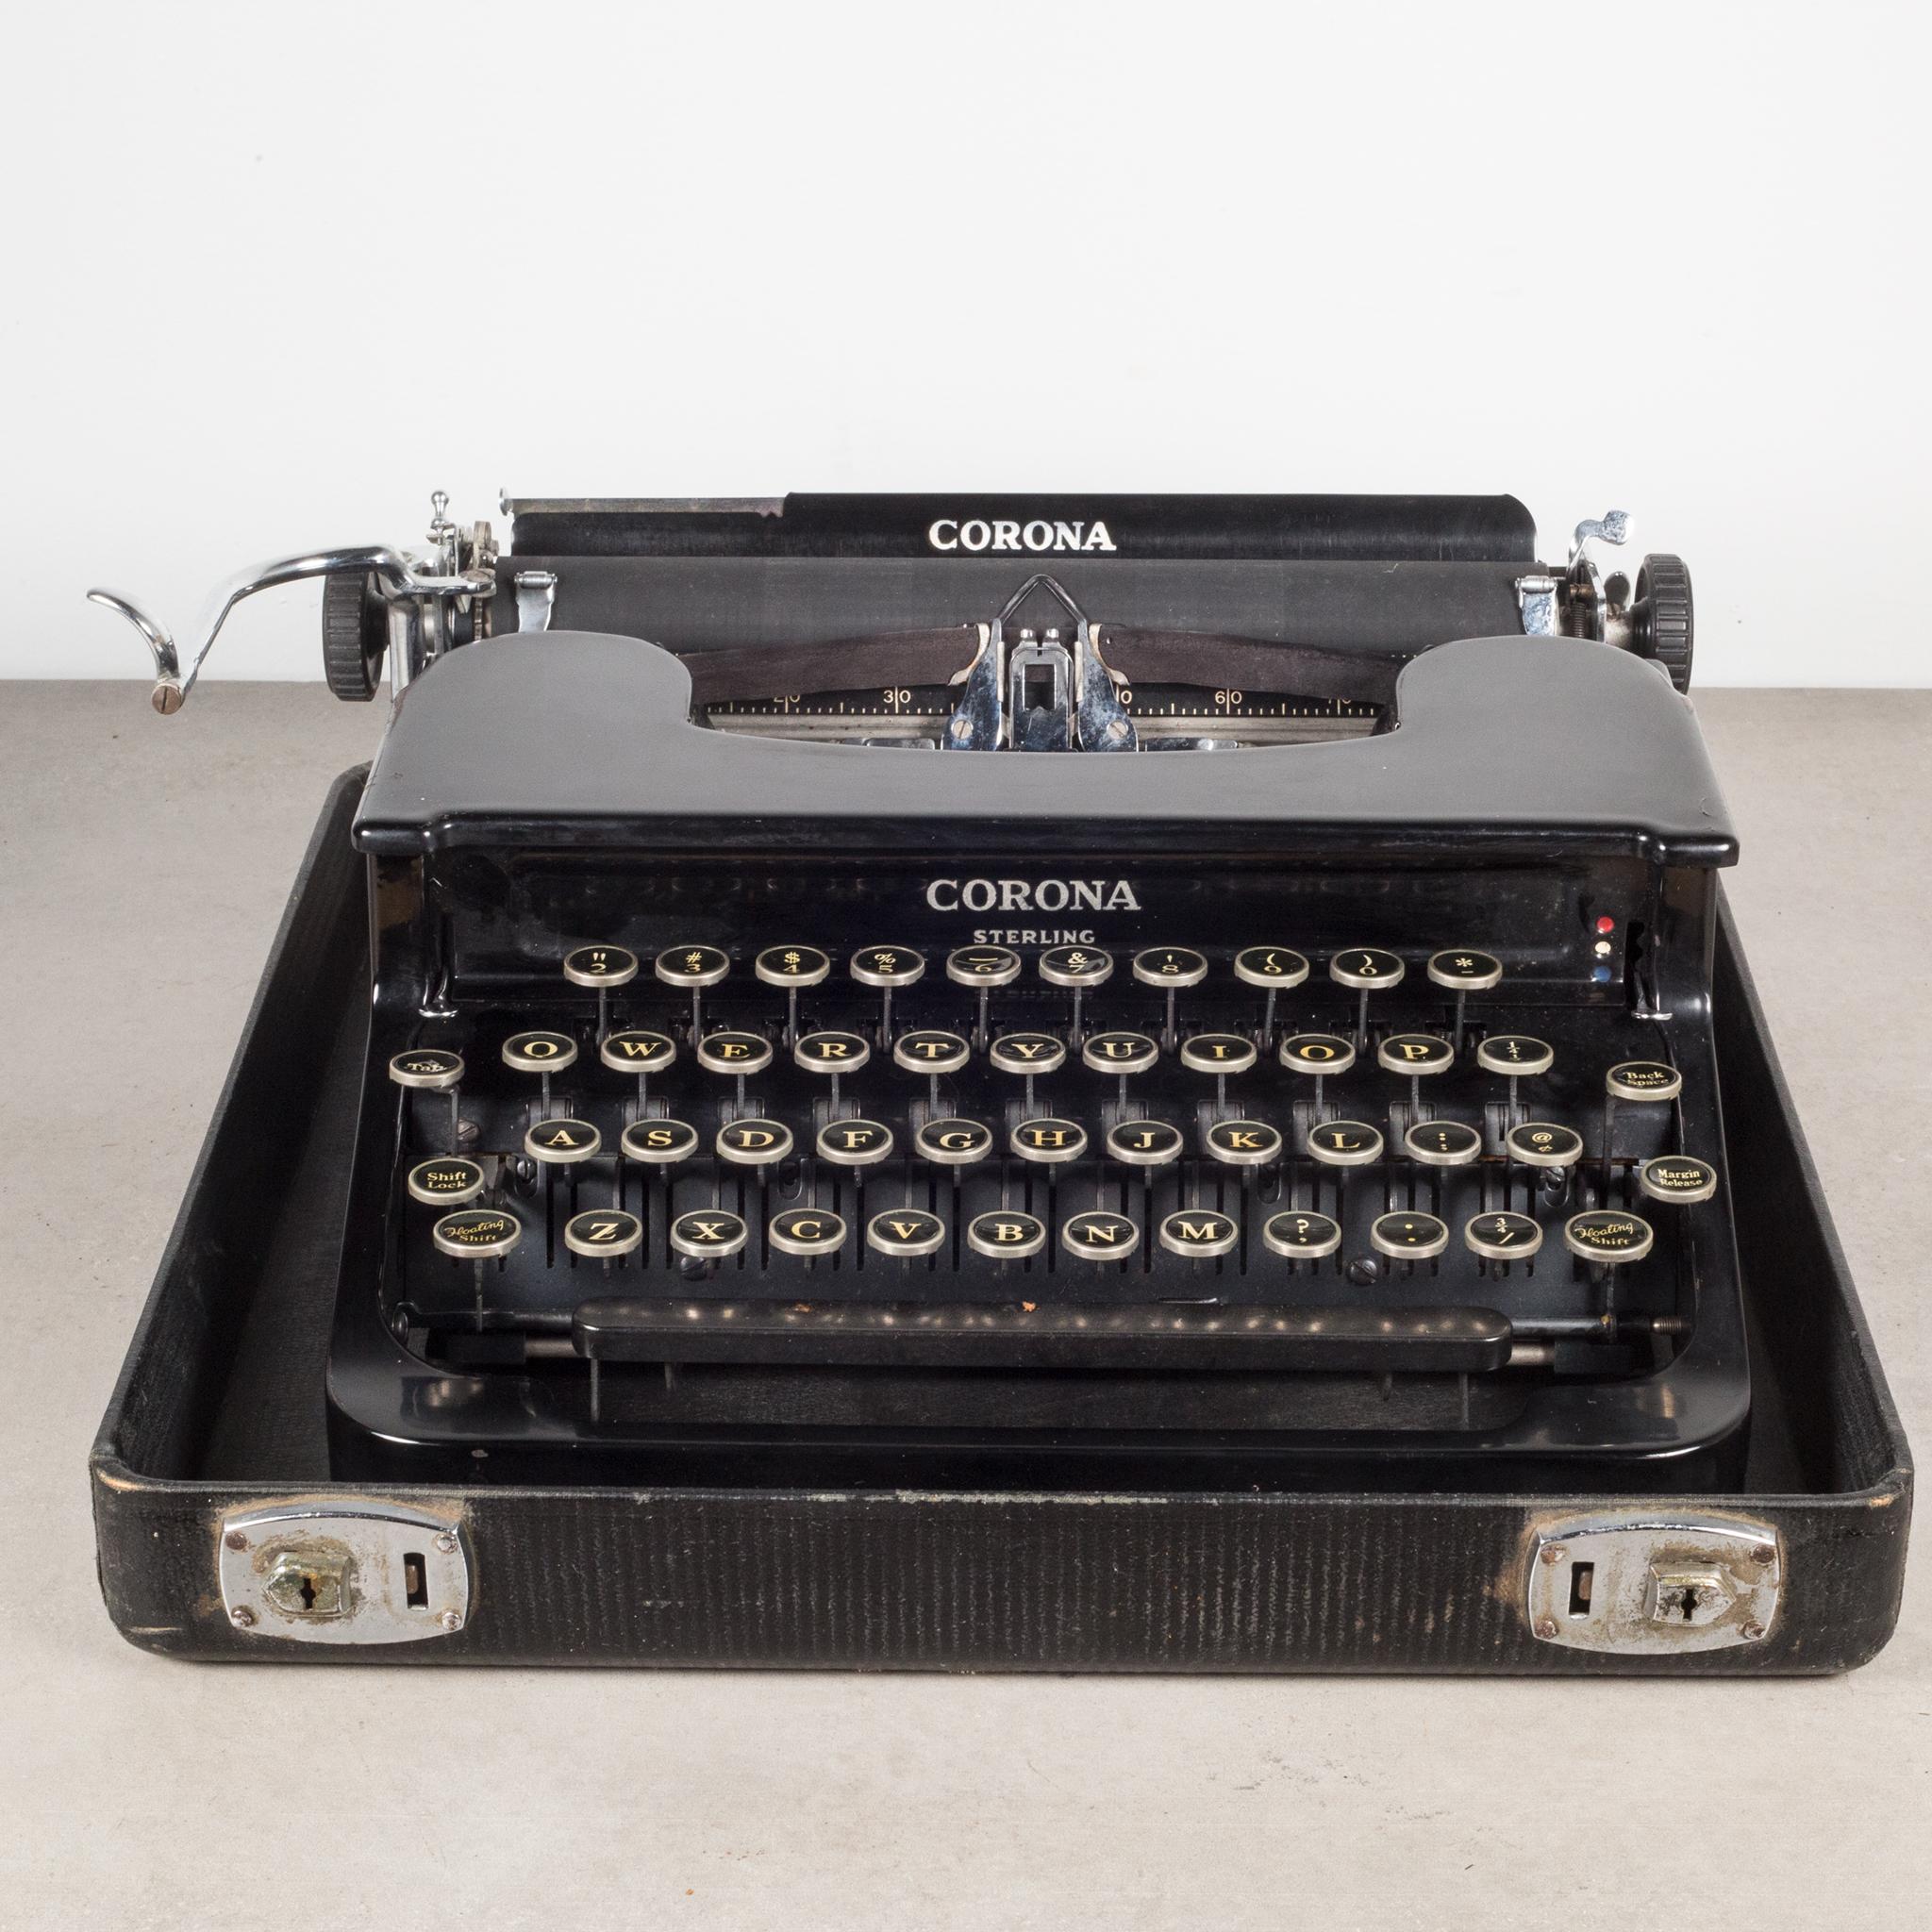 About

A fully refurbished Art Deco Corona Sterling typewriter in gloss black with original case and original store sticker on the side. The keys are nickle with white interior and black letters. This typewriter has been refurbished and has smooth